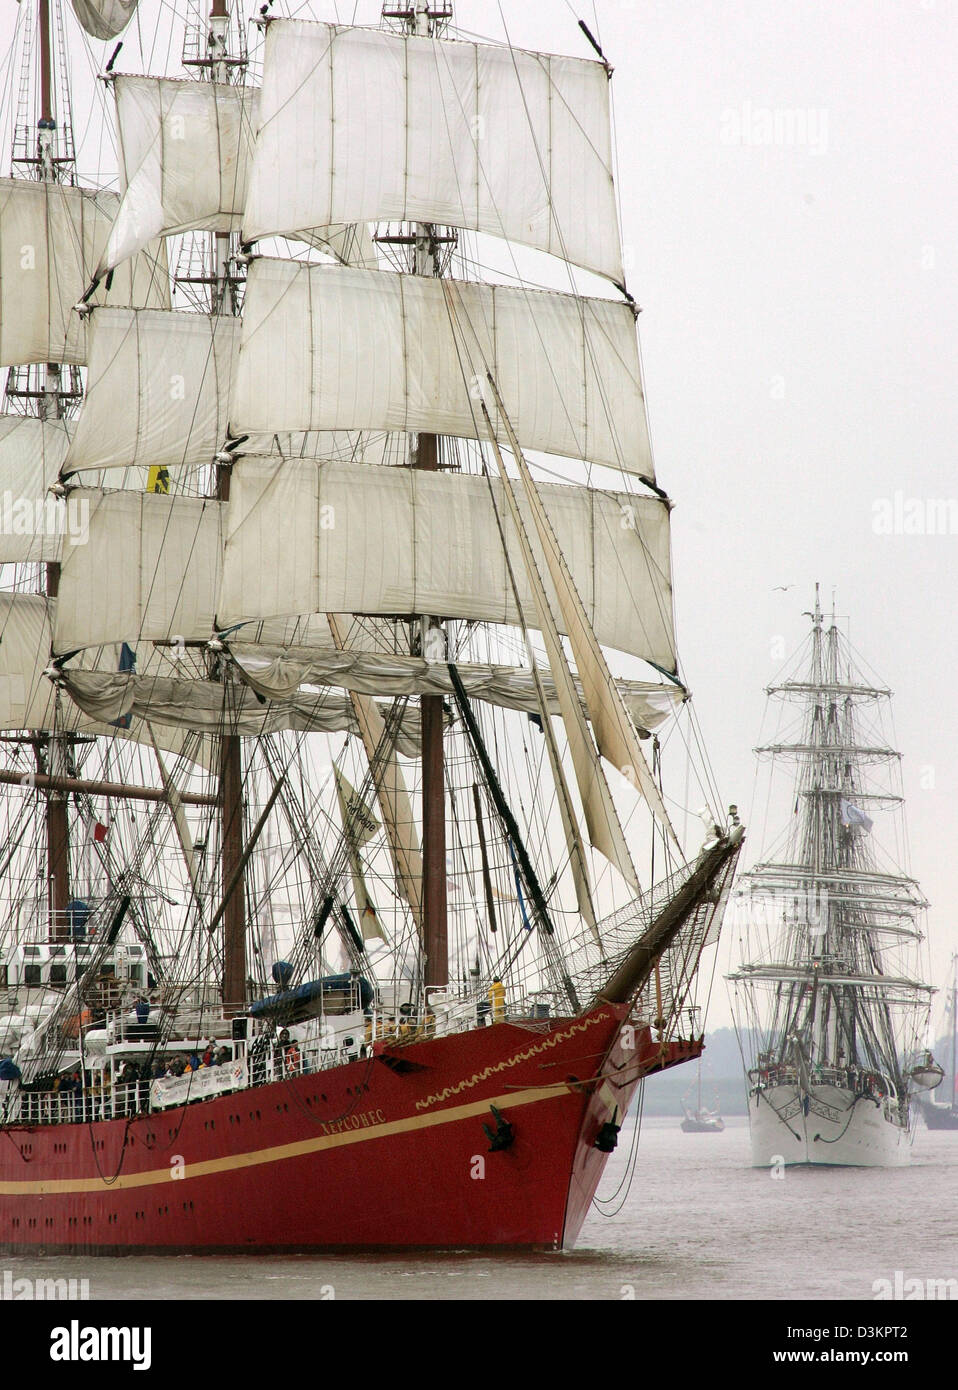 The World's Largest Full-Rigged Sailing Ship (21 Photos) » TwistedSifter